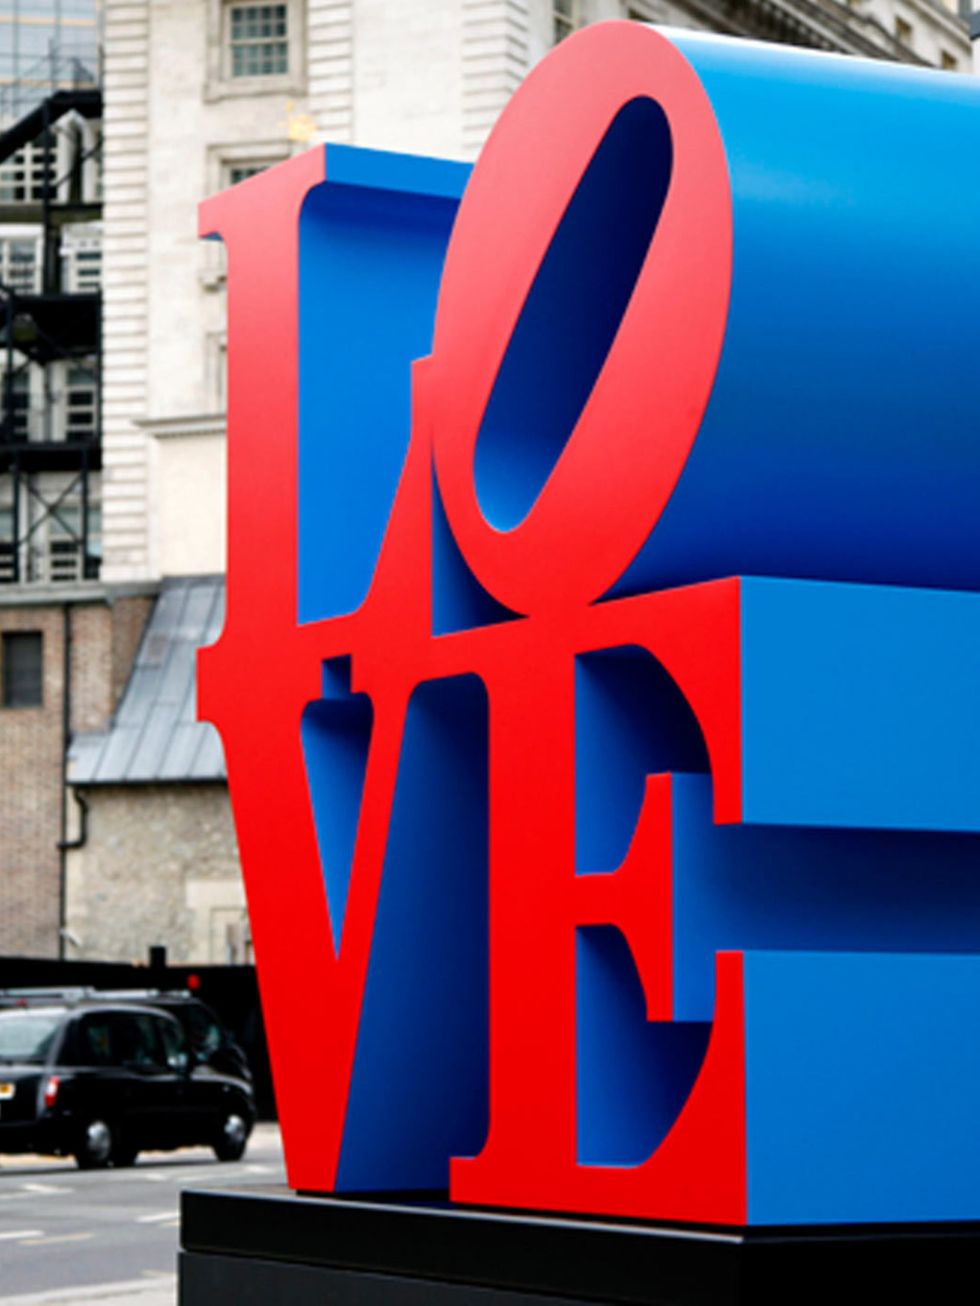 <p><strong>Sculpture in the City at the Square Mile</strong></p><p>The third year of this free outdoor exhibition in the heart of the Square Mile sees the largest line-up yet with nine art installations including the iconic LOVE sculpture by Robert Indian